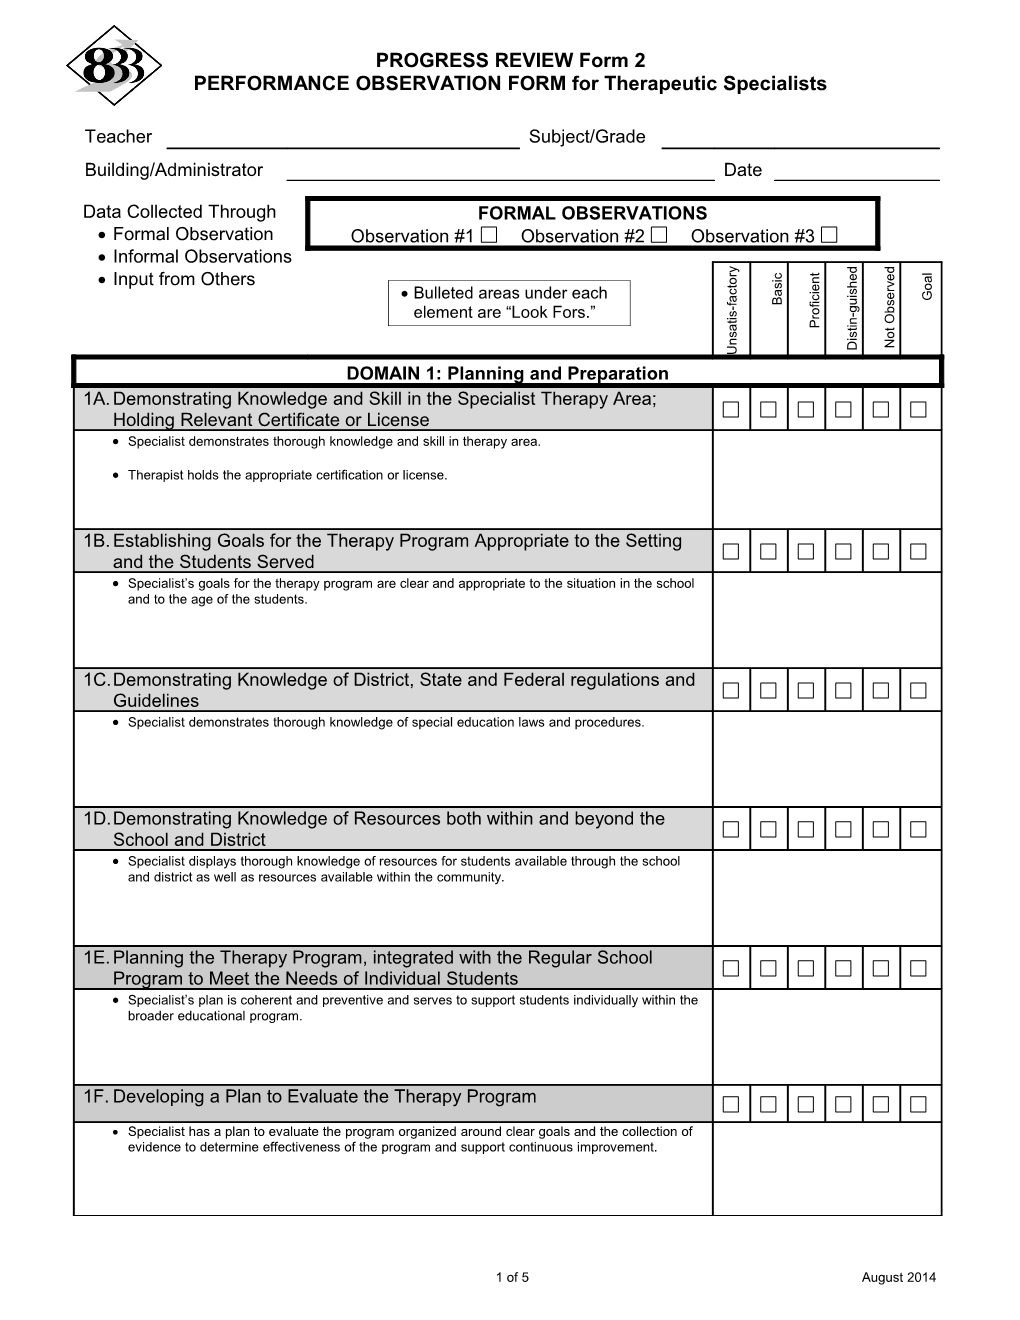 PERFORMANCE OBSERVATION FORM for Therapeutic Specialists